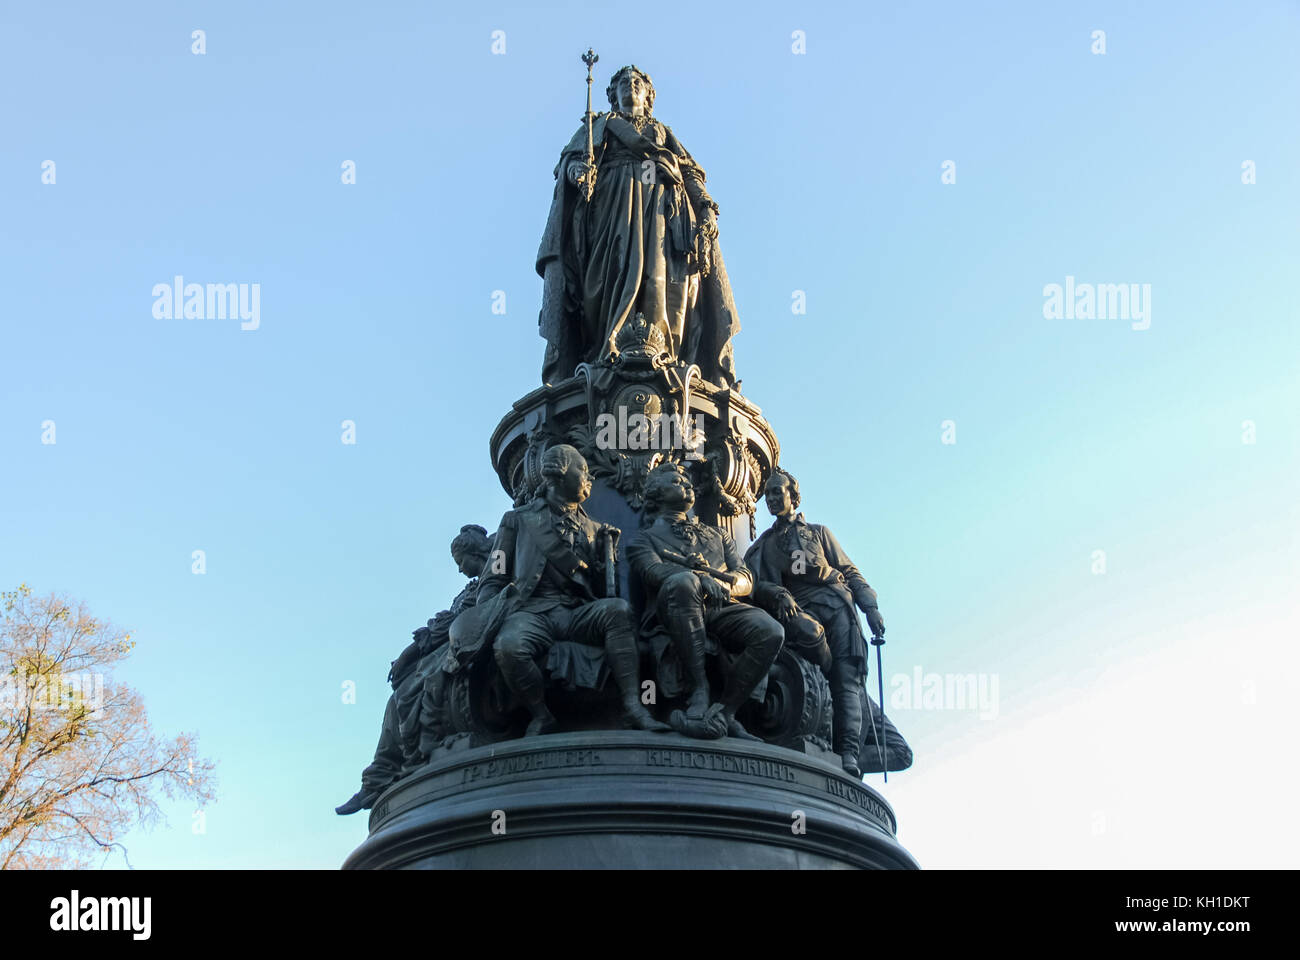 Monument to Catherine the Great in Saint Petersburg, Russia Stock Photo